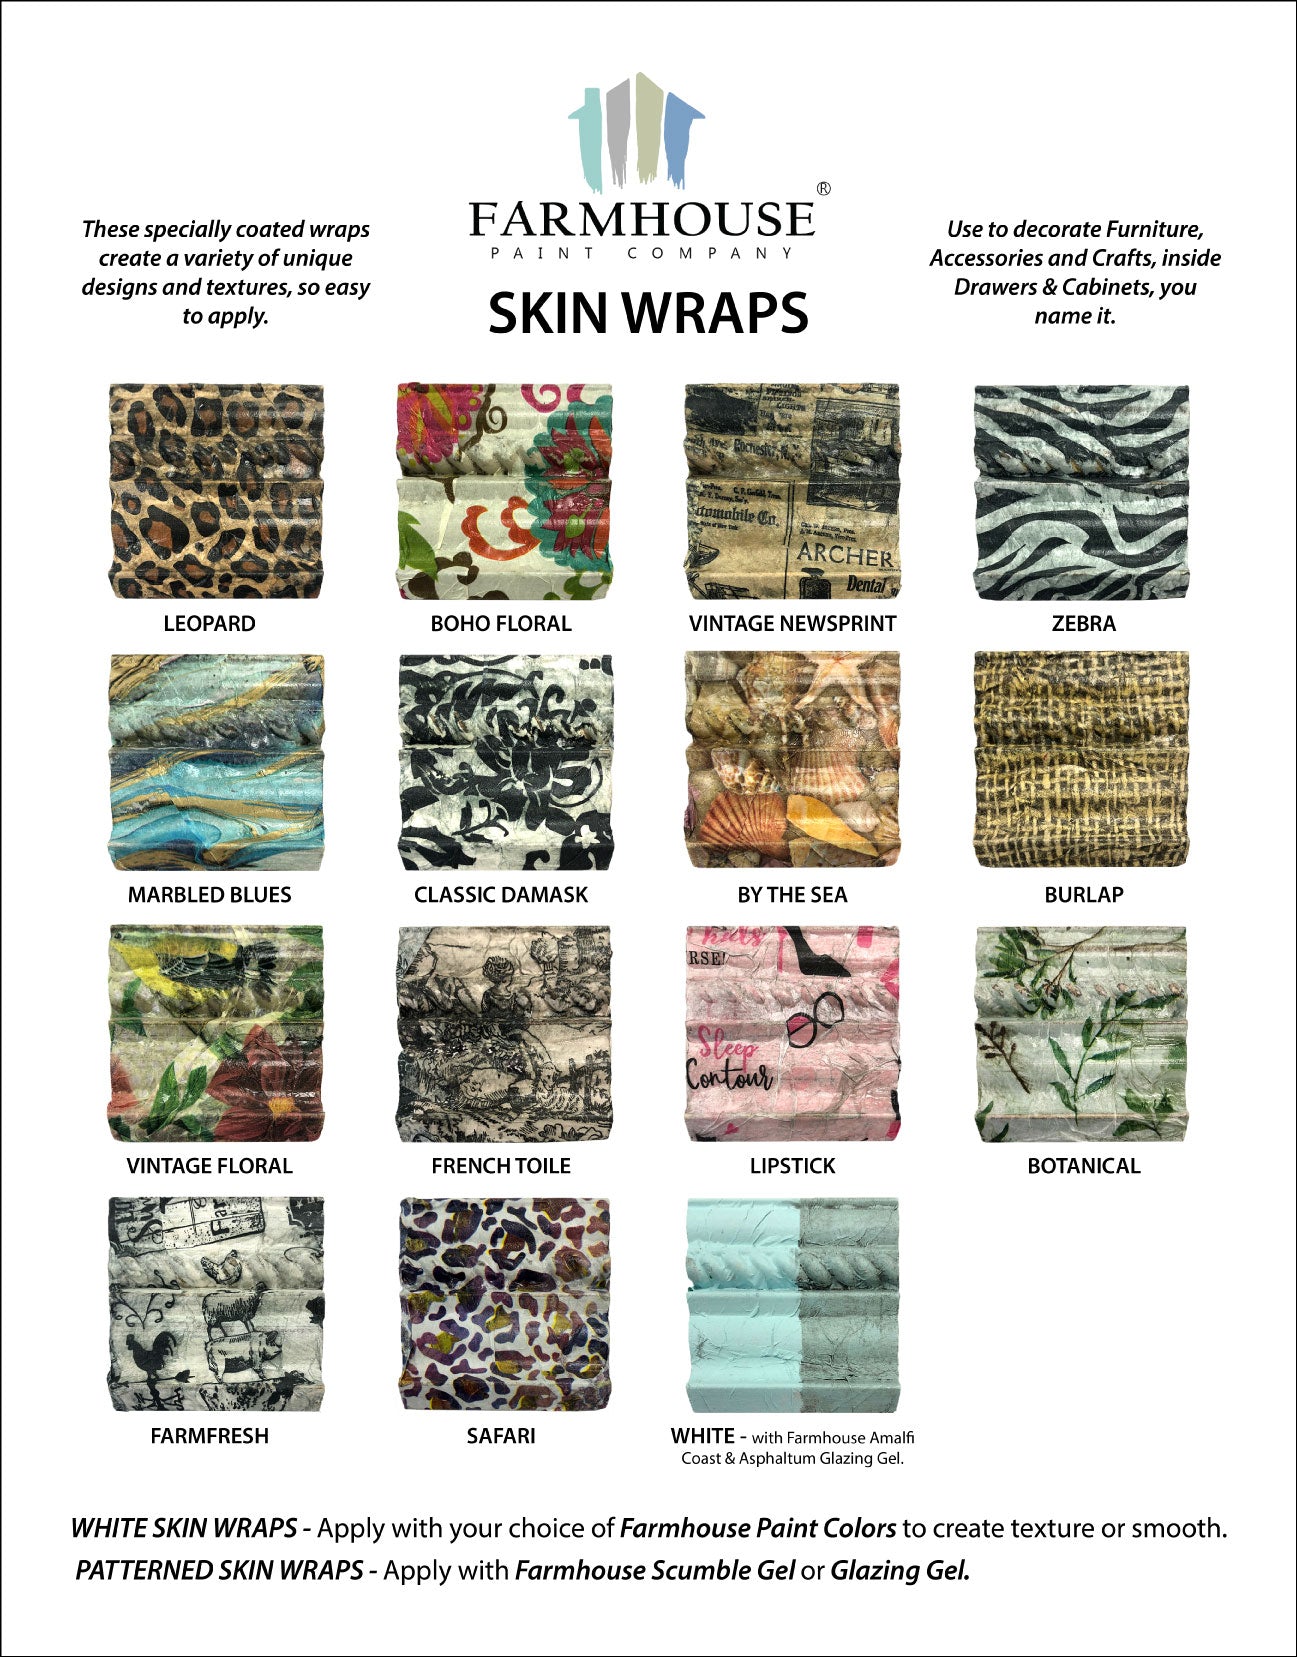 Skin Wraps Farmhouse Paint Botanical pack of 5 papers